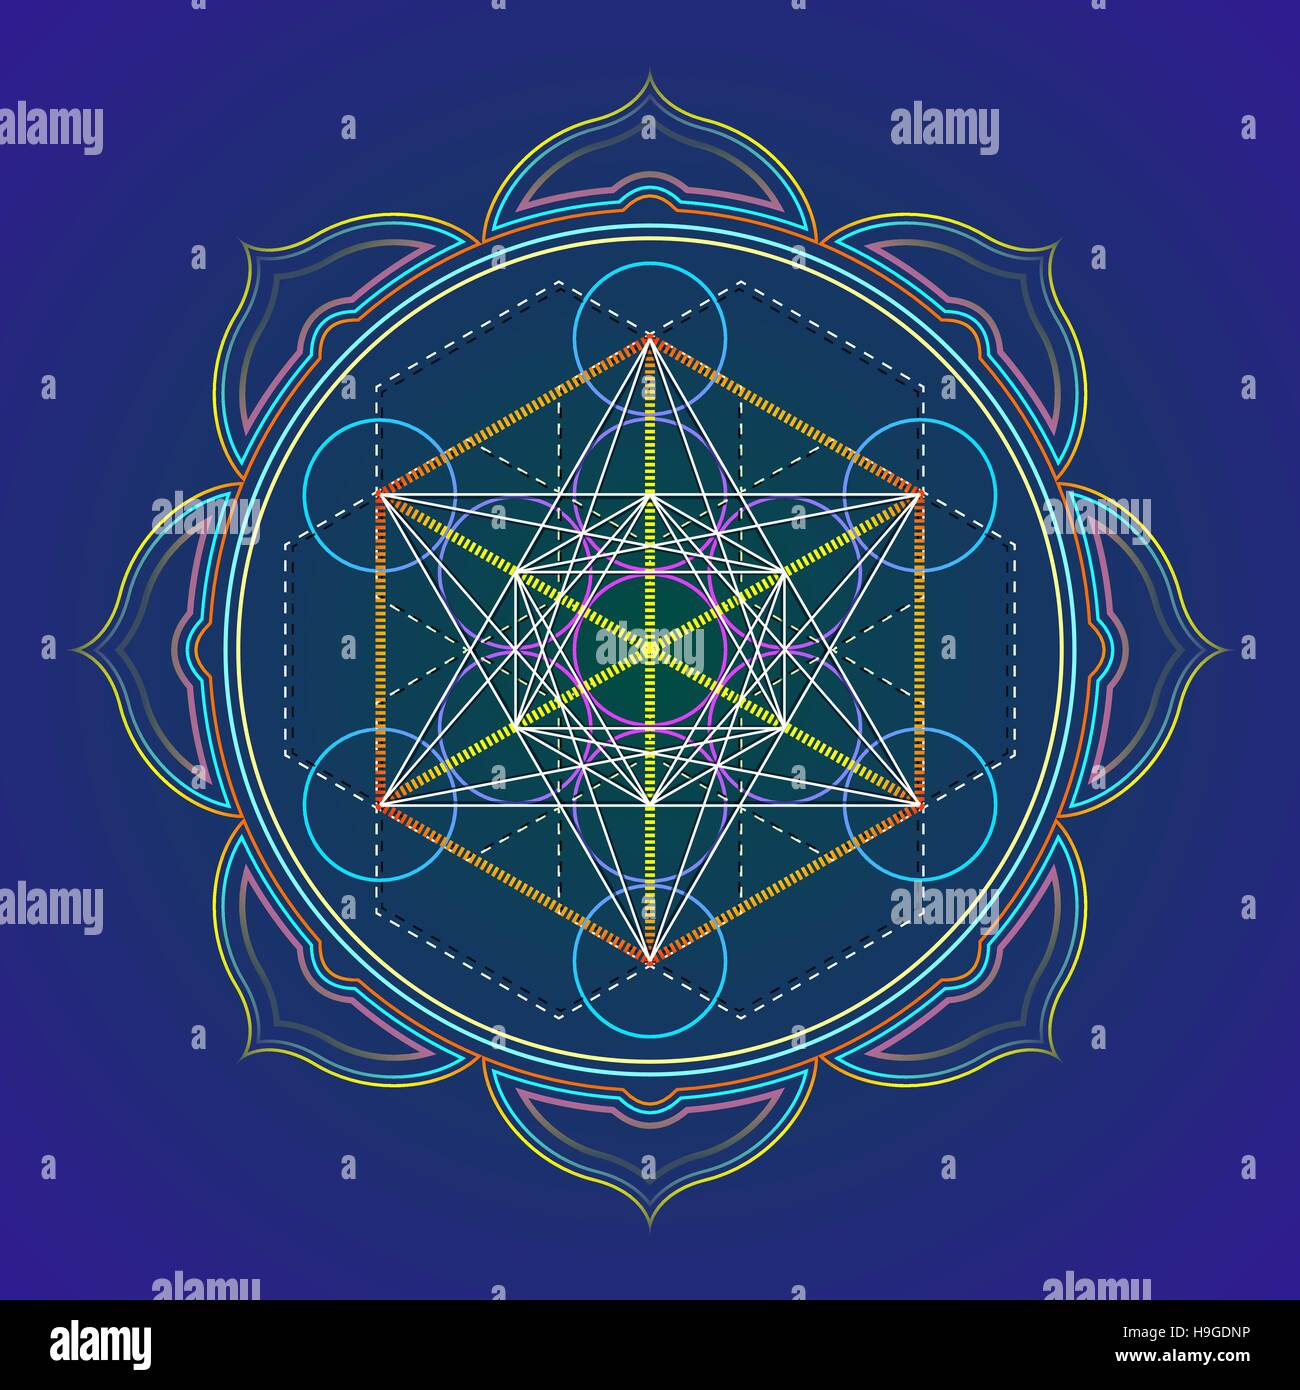 Metatrons Cube Merkabah from RedBubble  Day of the Shirt